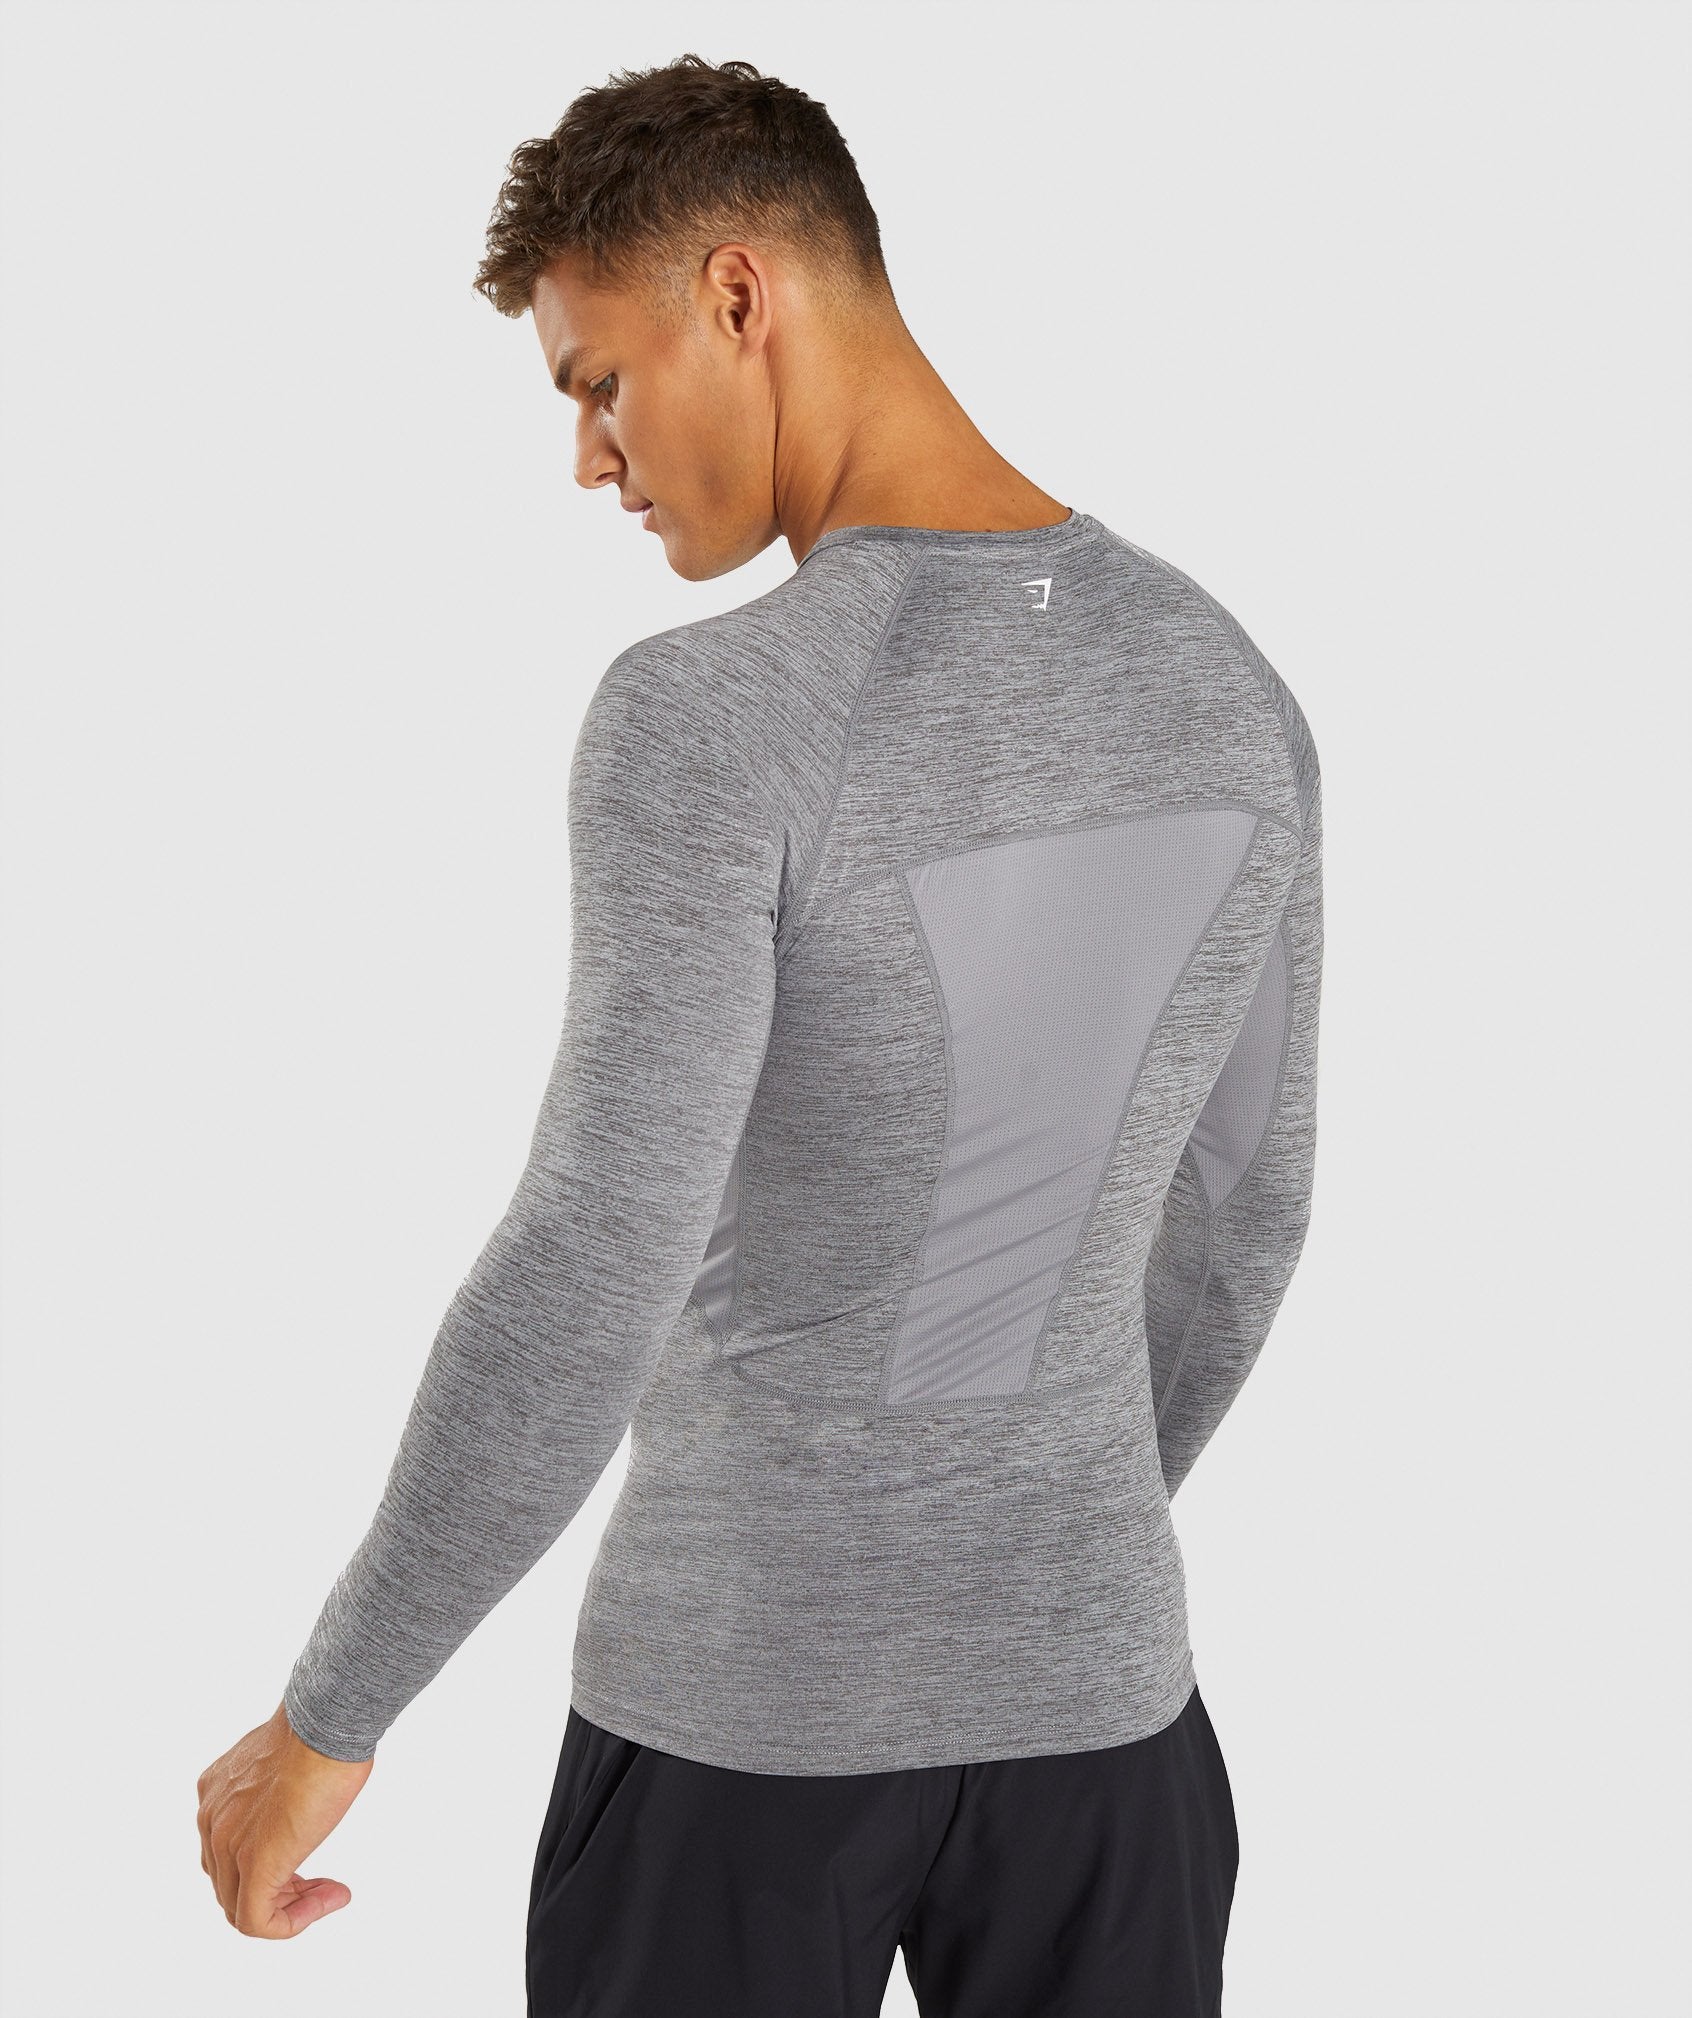 Element+ Baselayer Long Sleeve Top in Smokey Grey Marl - view 2